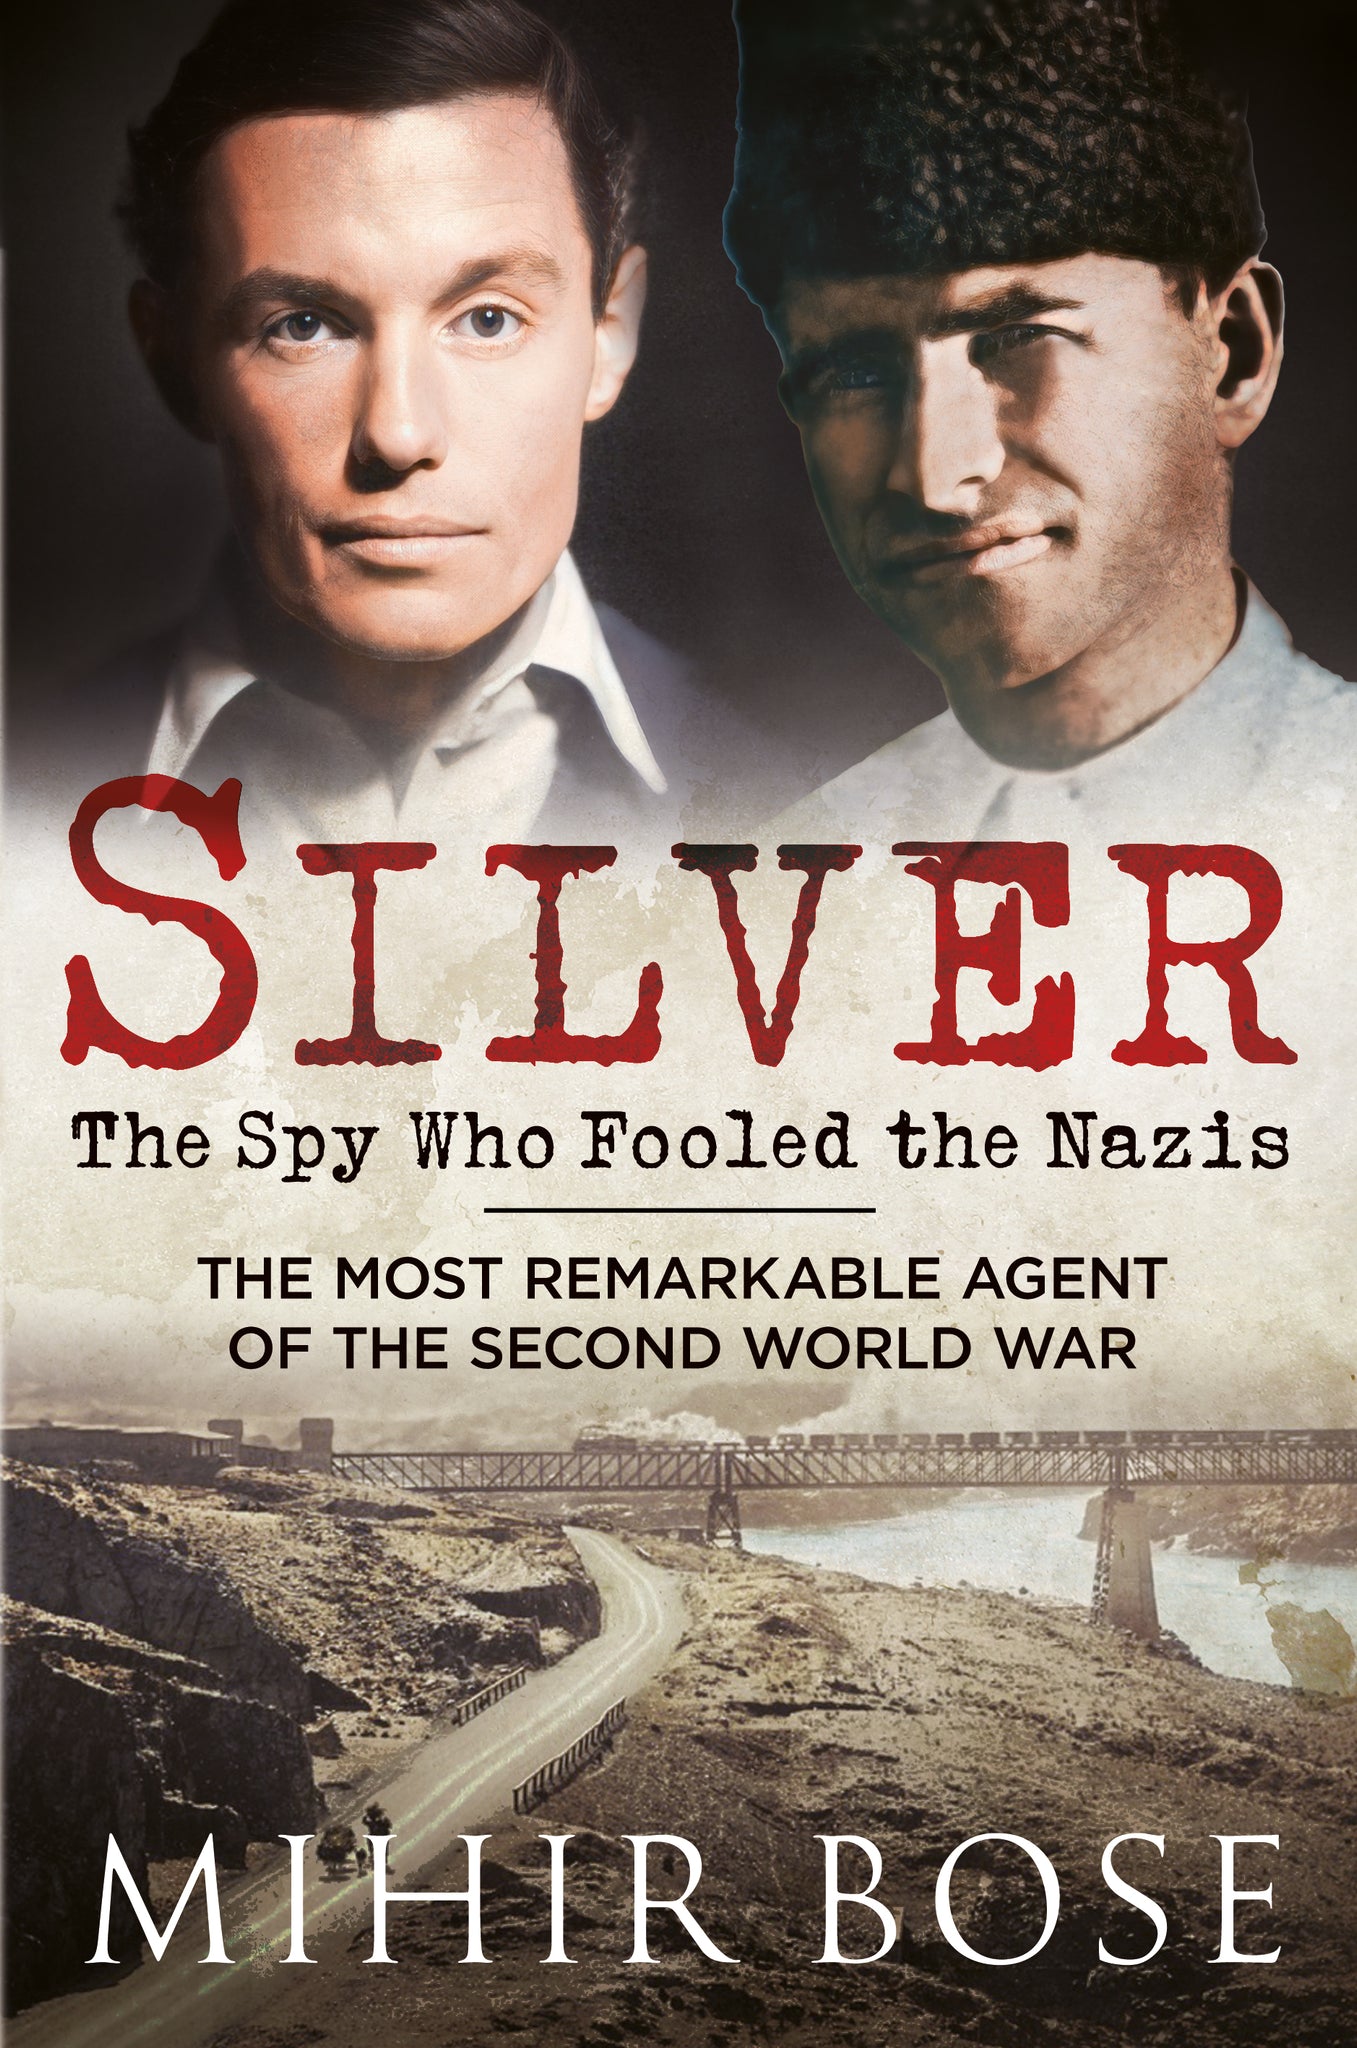 Silver: The Spy Who Fooled the Nazis - The Most Remarkable Spy of The Second World War